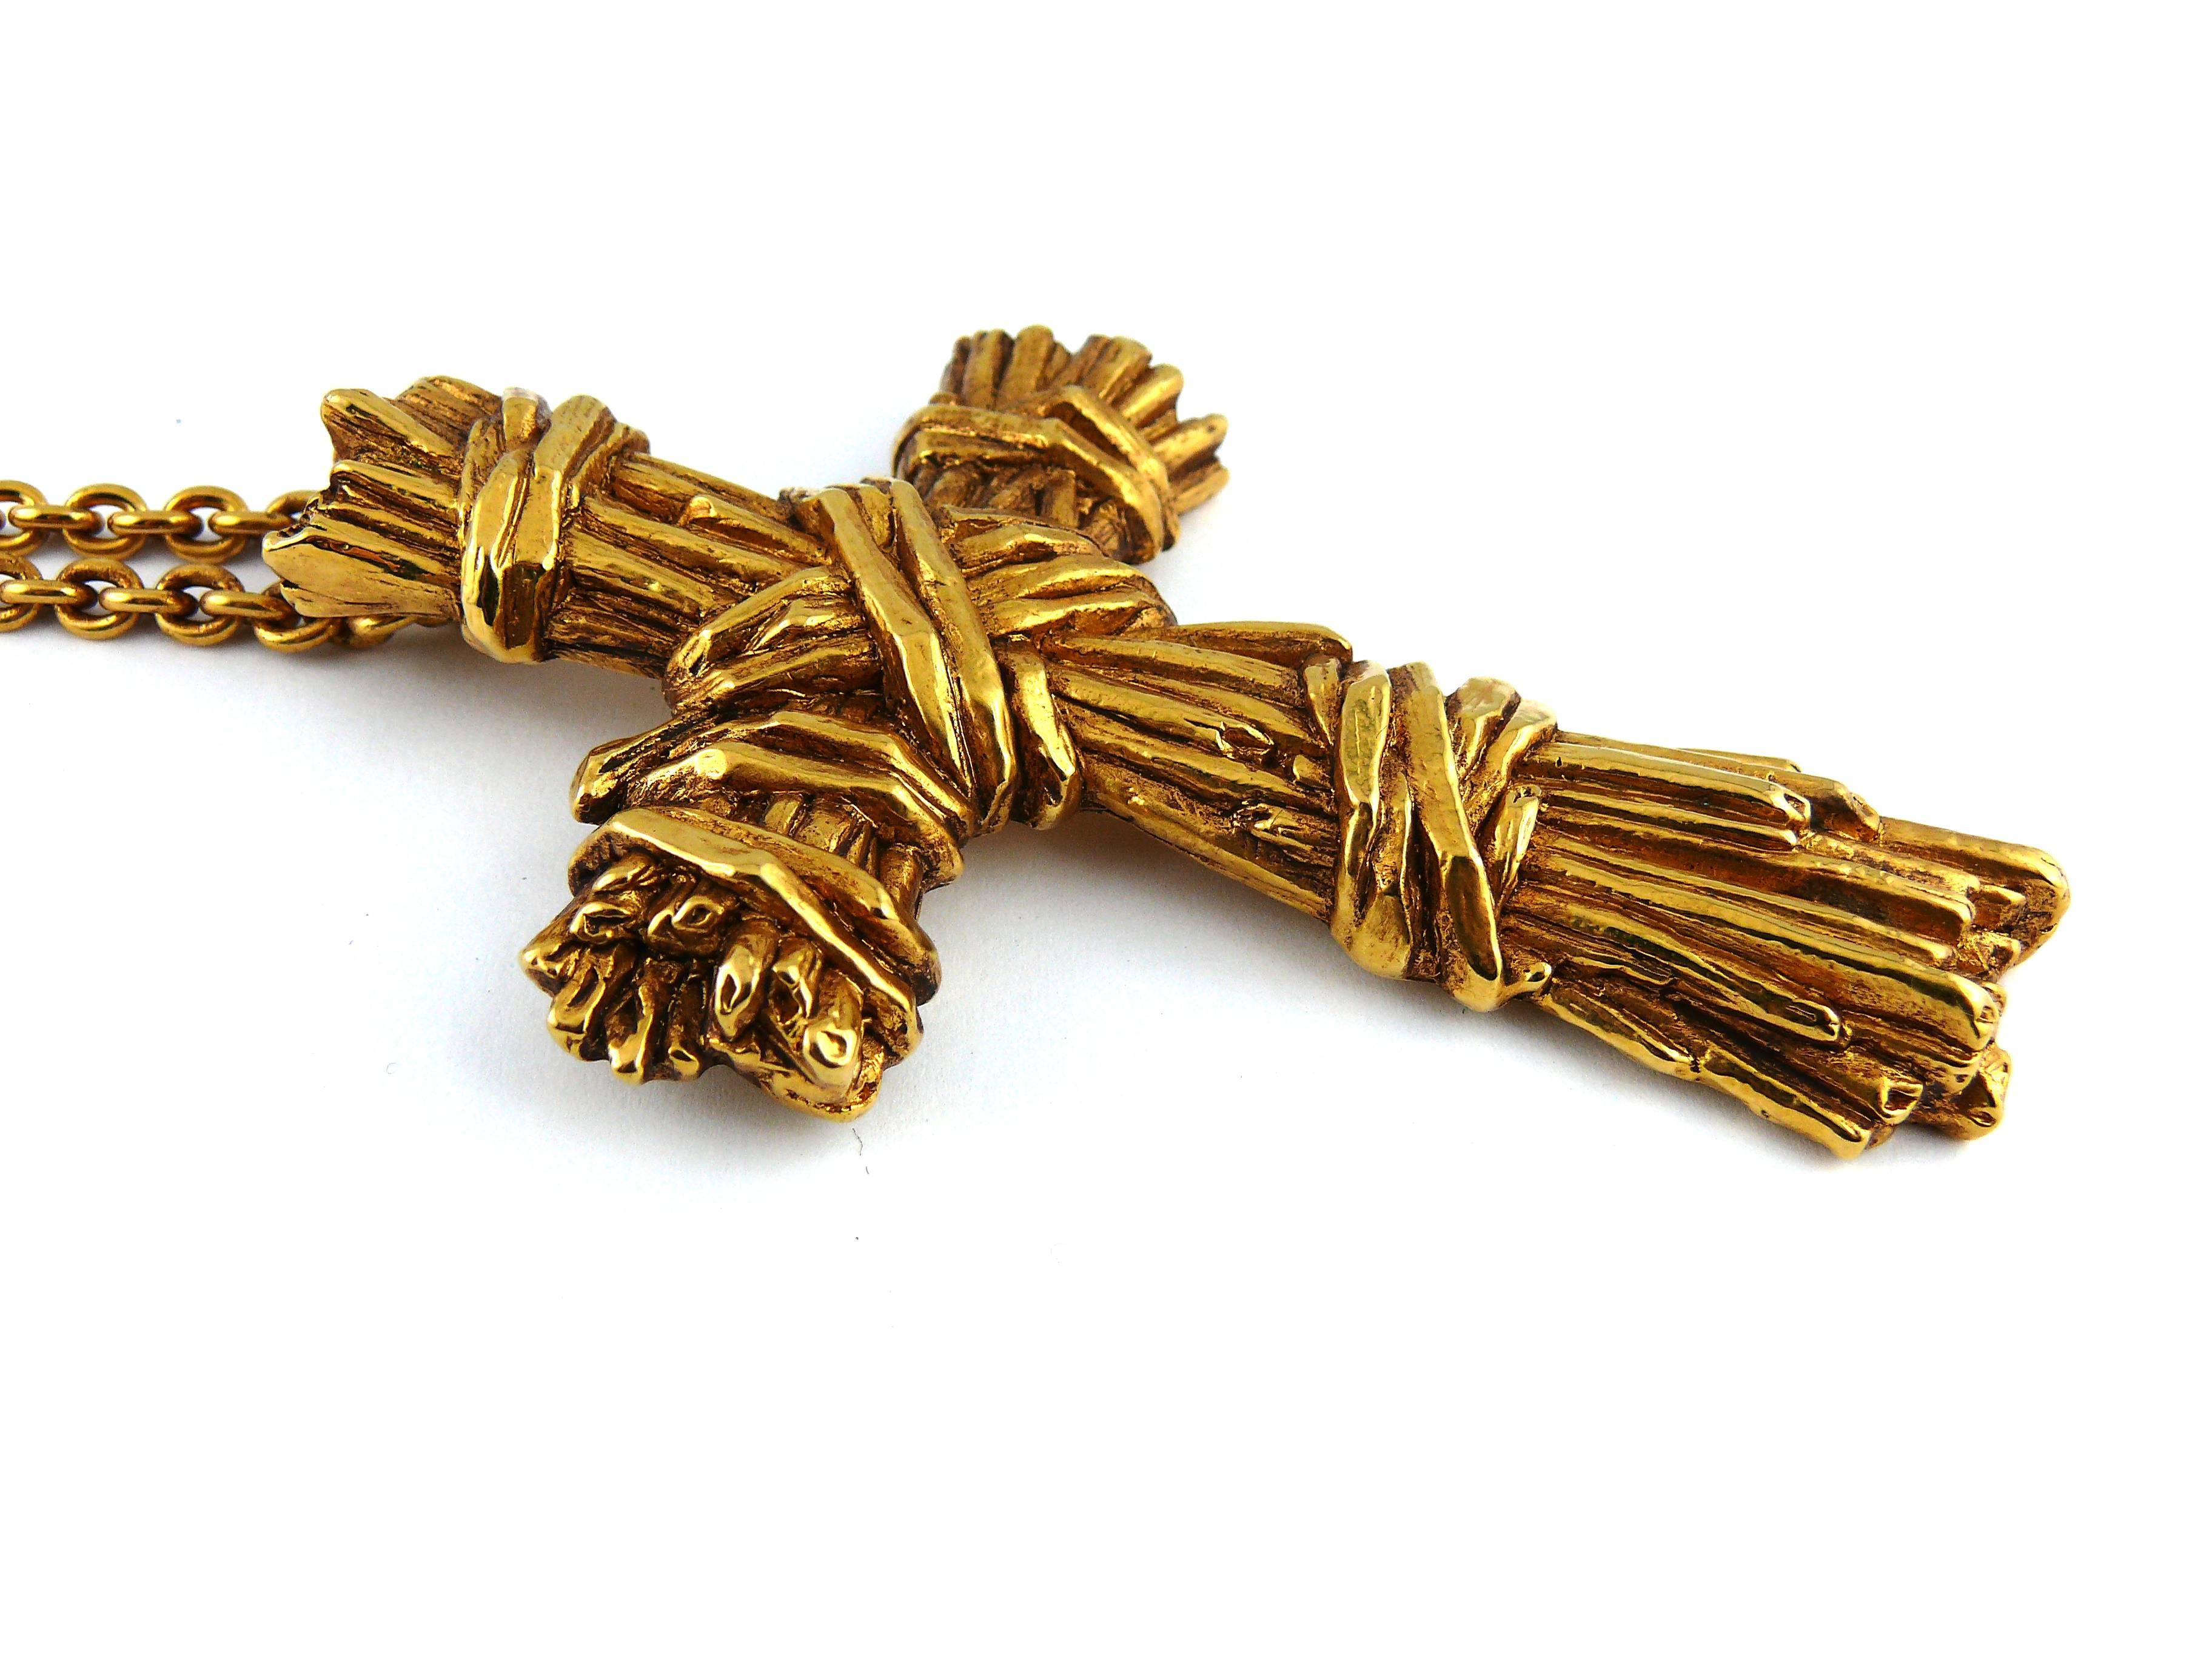 CHRISTIAN LACROIX vintage gold tone necklace featuring a massive ribbed textured cross pendant.

Marked CHRISTIAN LACROIX CL Made in France.

Indicative measurements : total length worn approx. 46 cm (18.11 inches) / cross approx. 10.5 x 7 cm